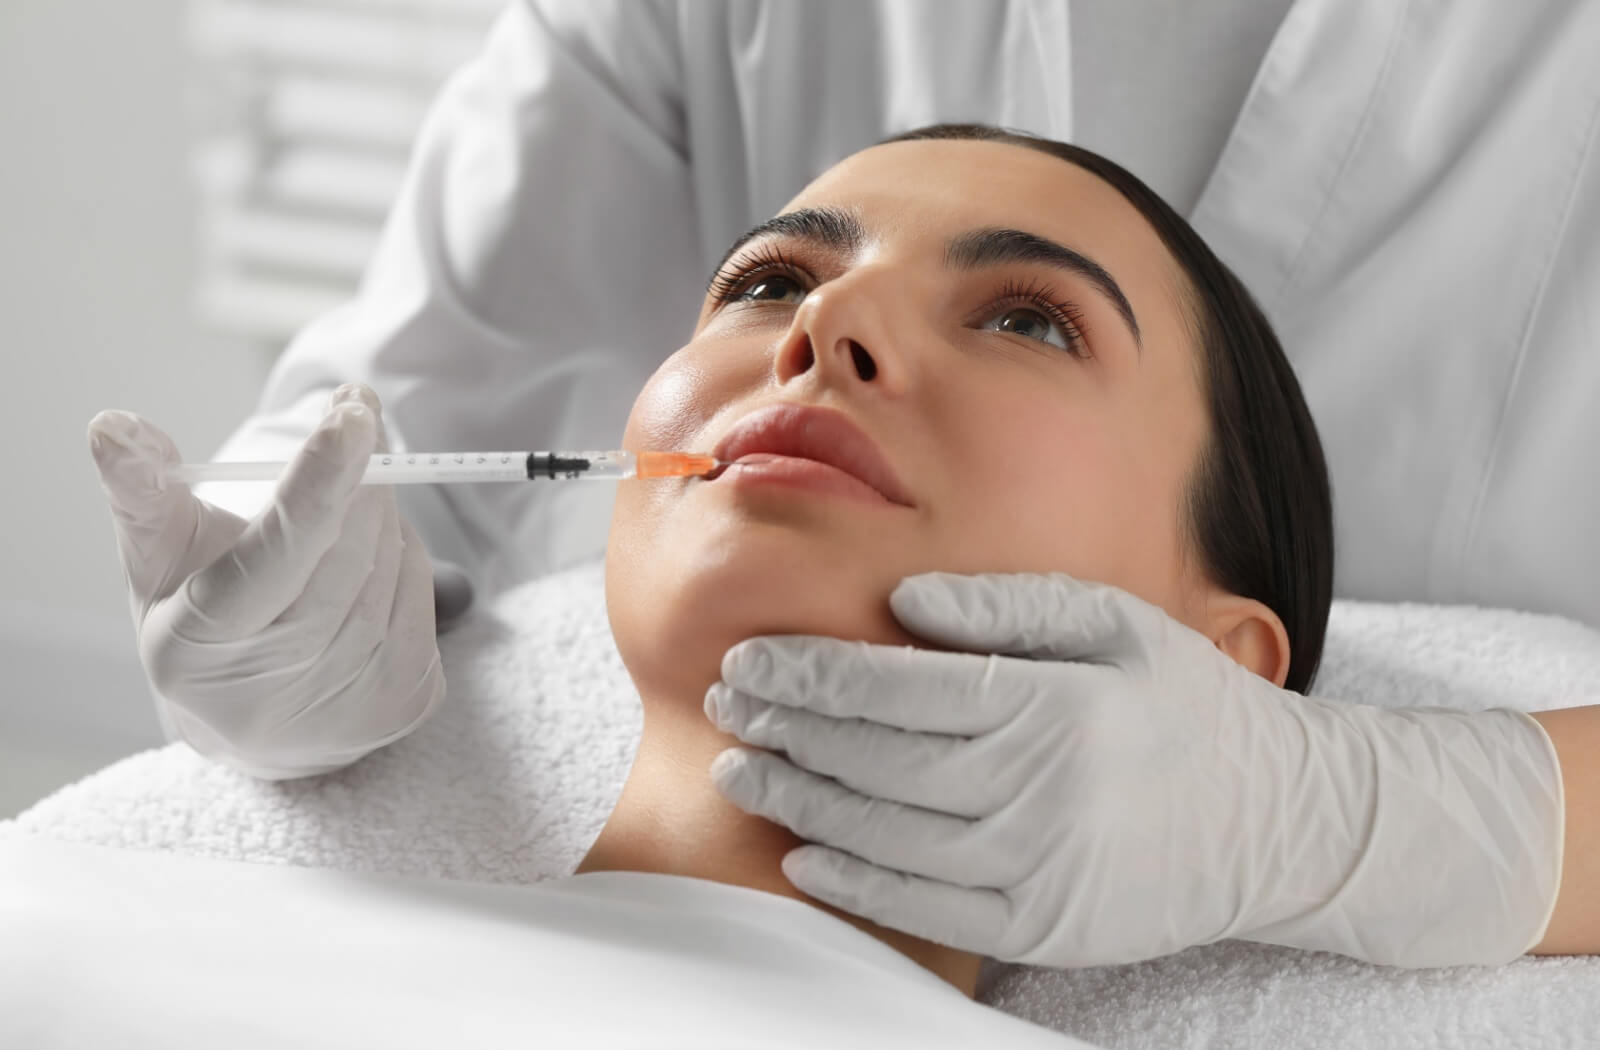 A woman receiving a lip filler injection in a clinic.